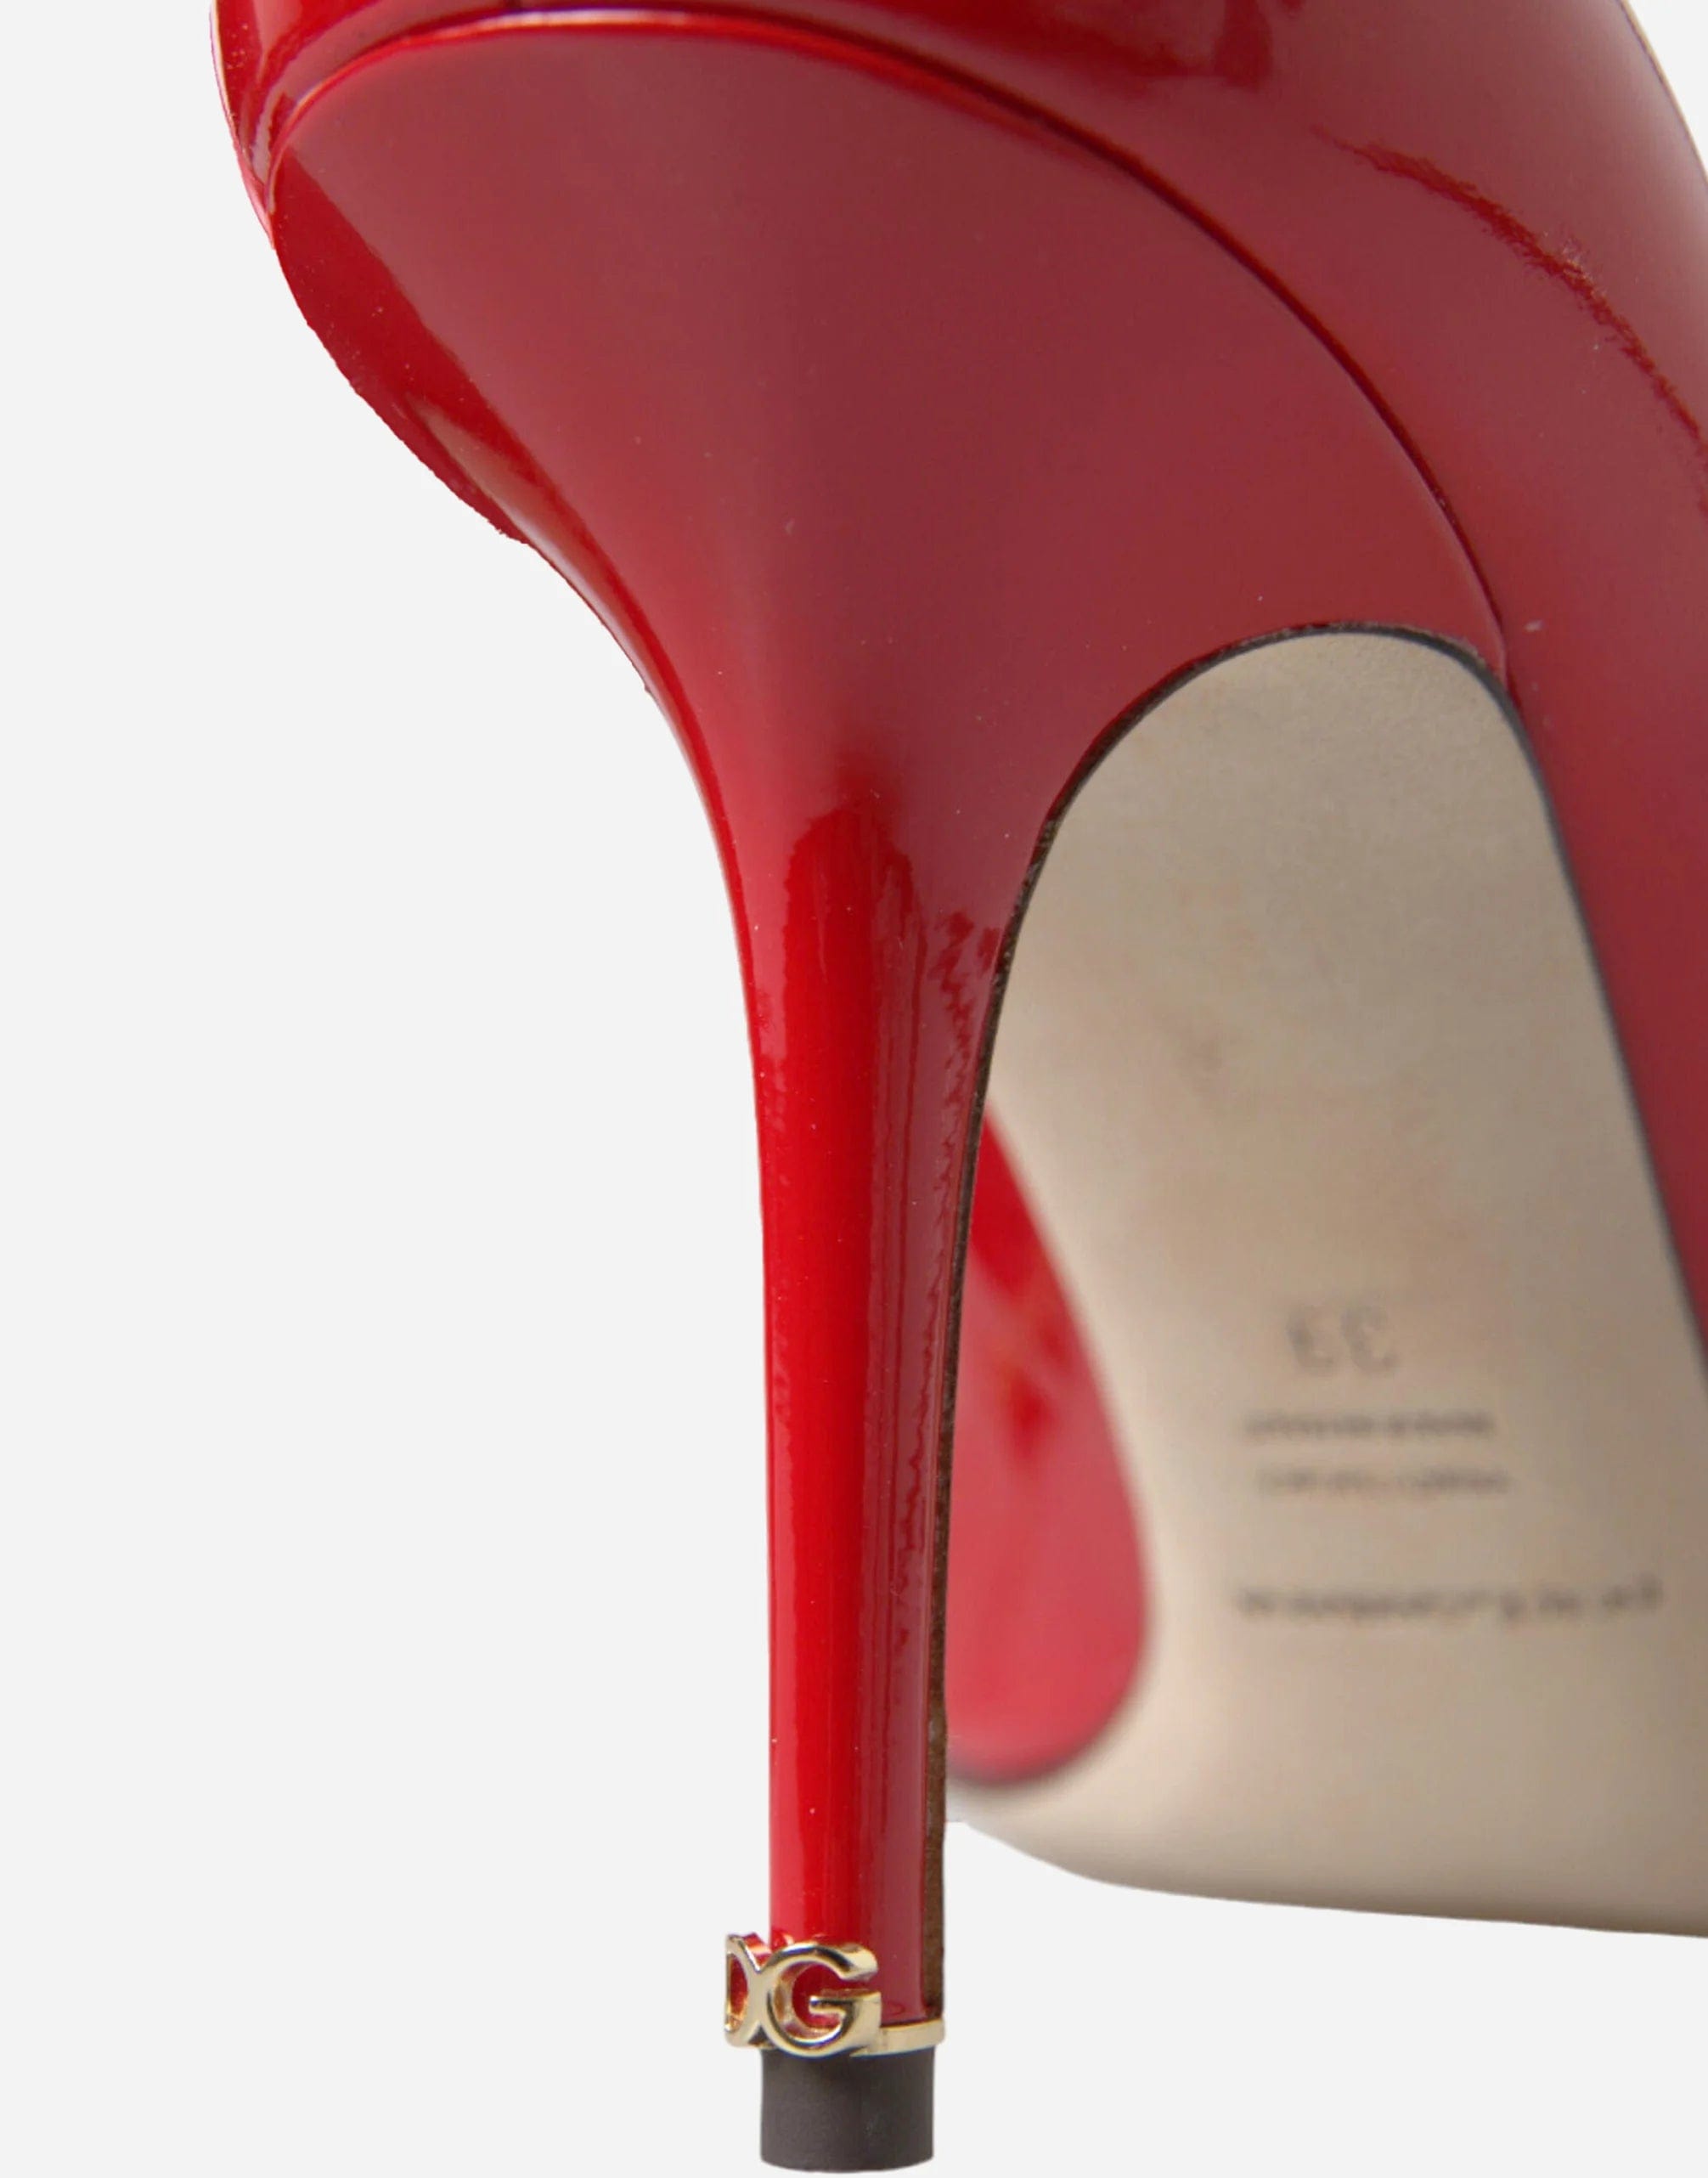 Polished Patent Leather Pumps